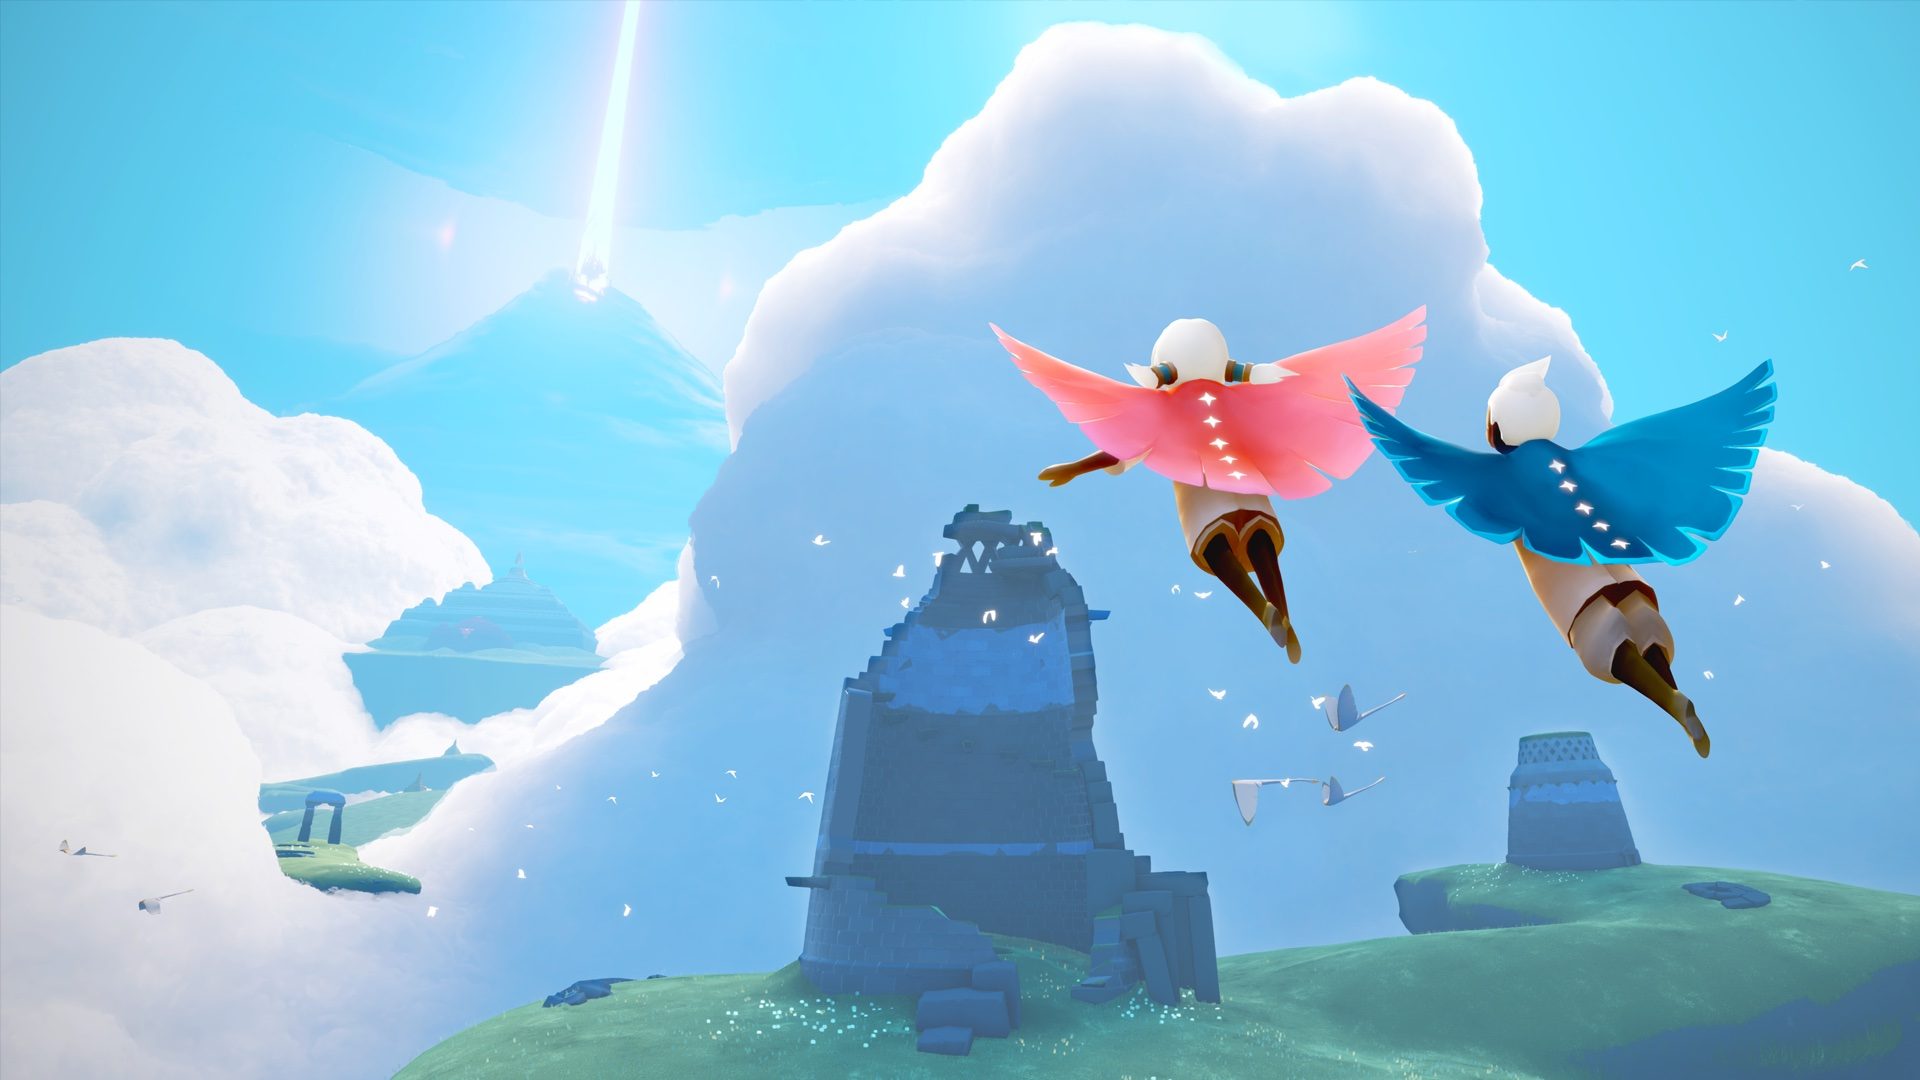 Creators of return to PlayStation with Children of the Light, out December 6 – PlayStation.Blog